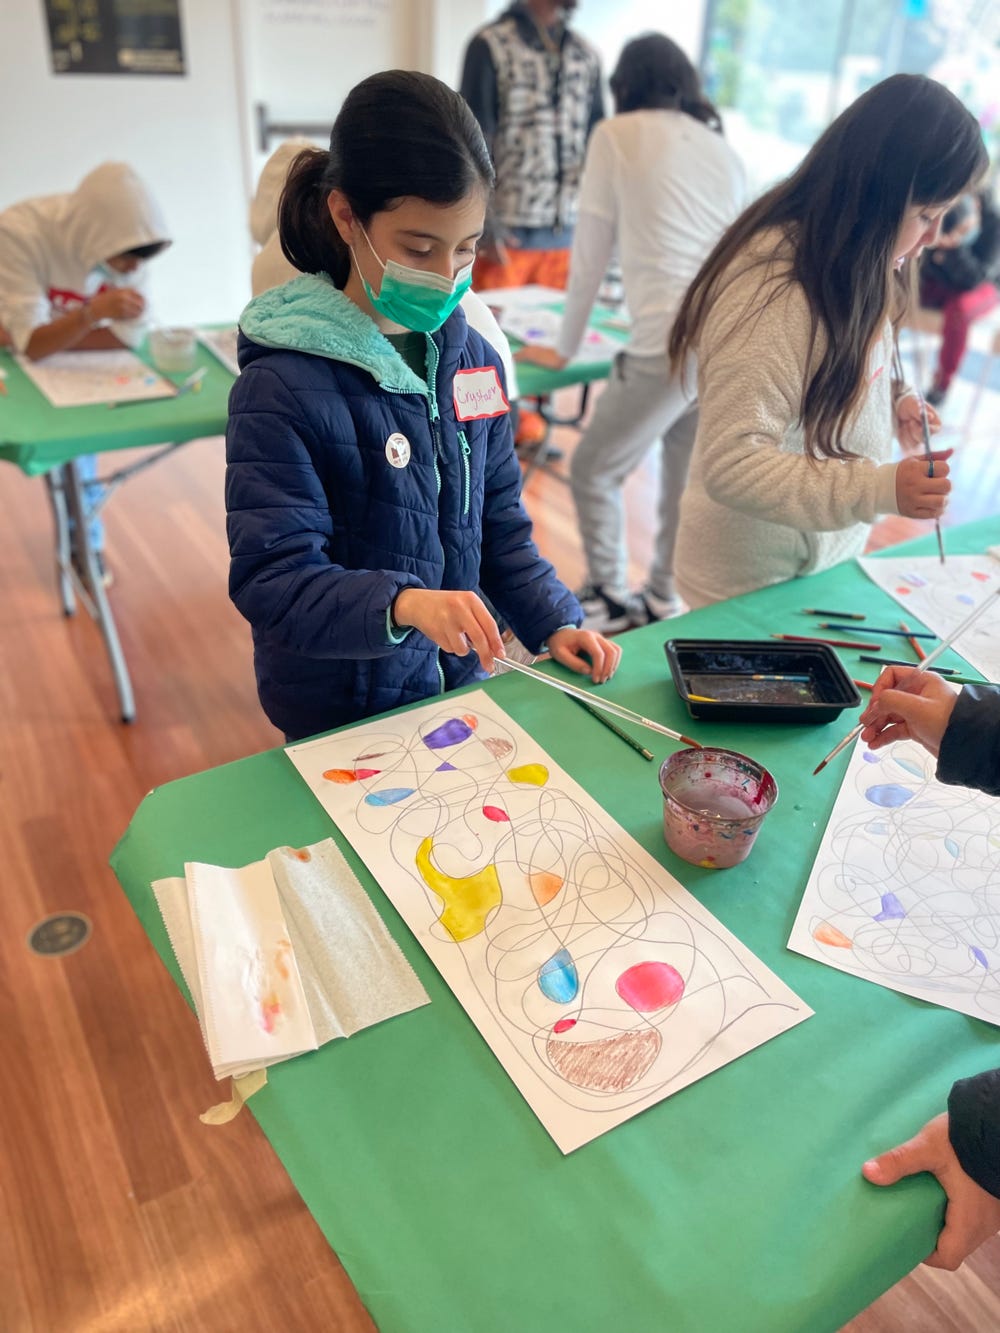 Student making art at the de Young museum